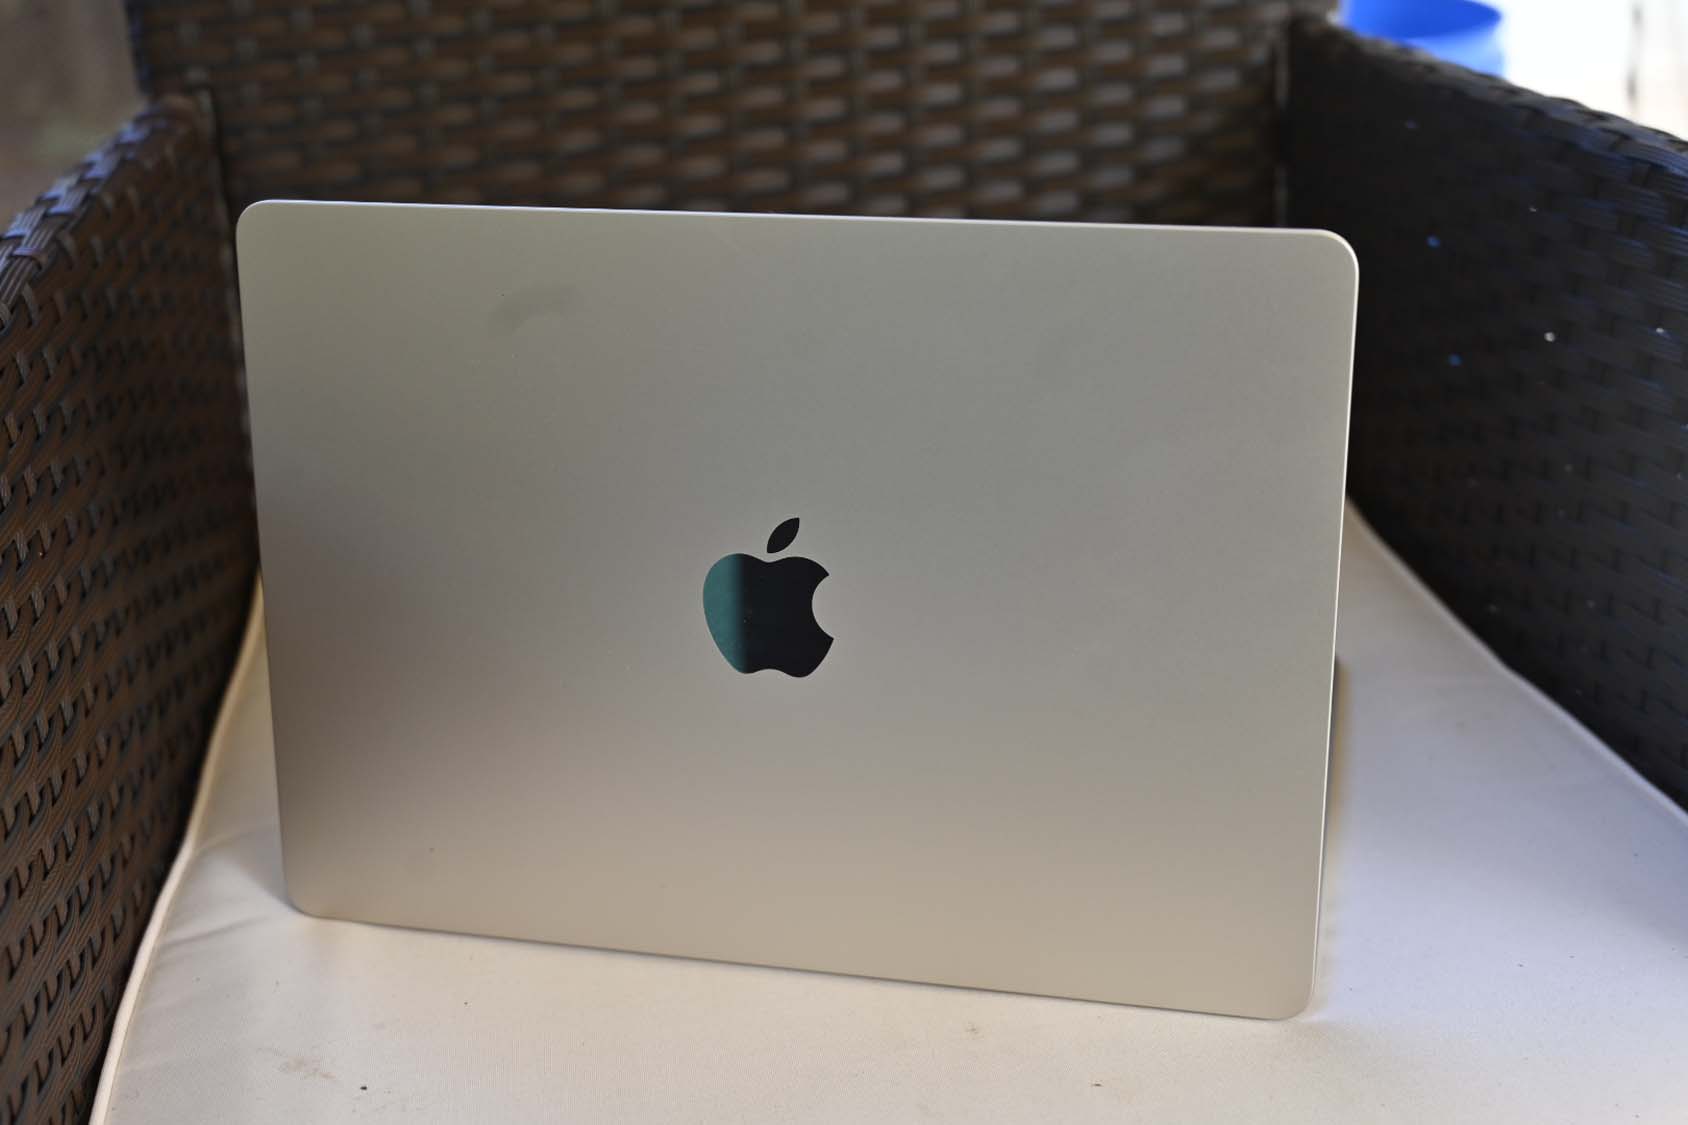 15-inch MacBook Air with M2 chip - Starlight